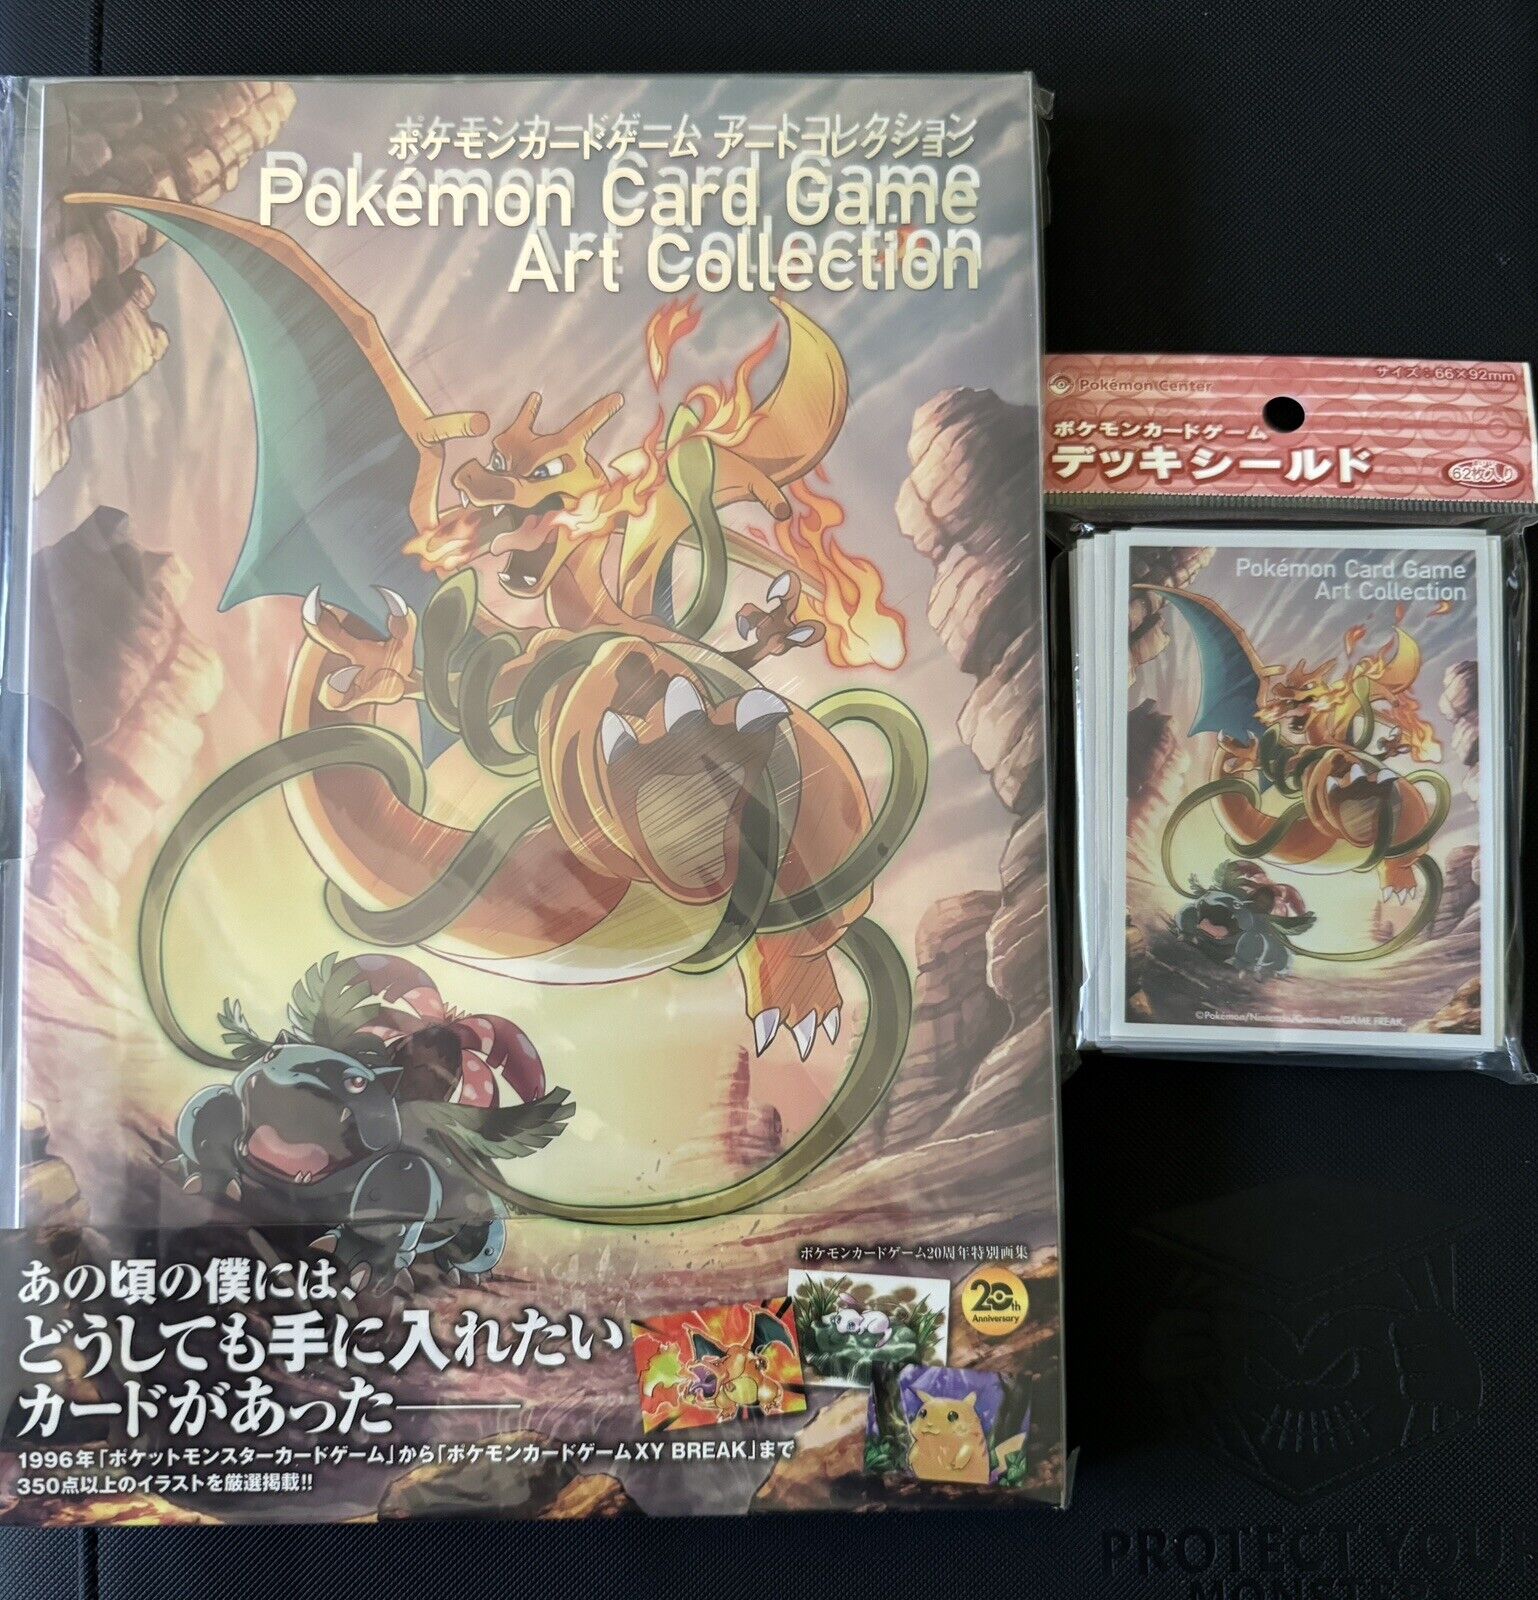 Pokemon Card Game Art Collection - Book + Limited Ed slevee - NO PROMO CARD -